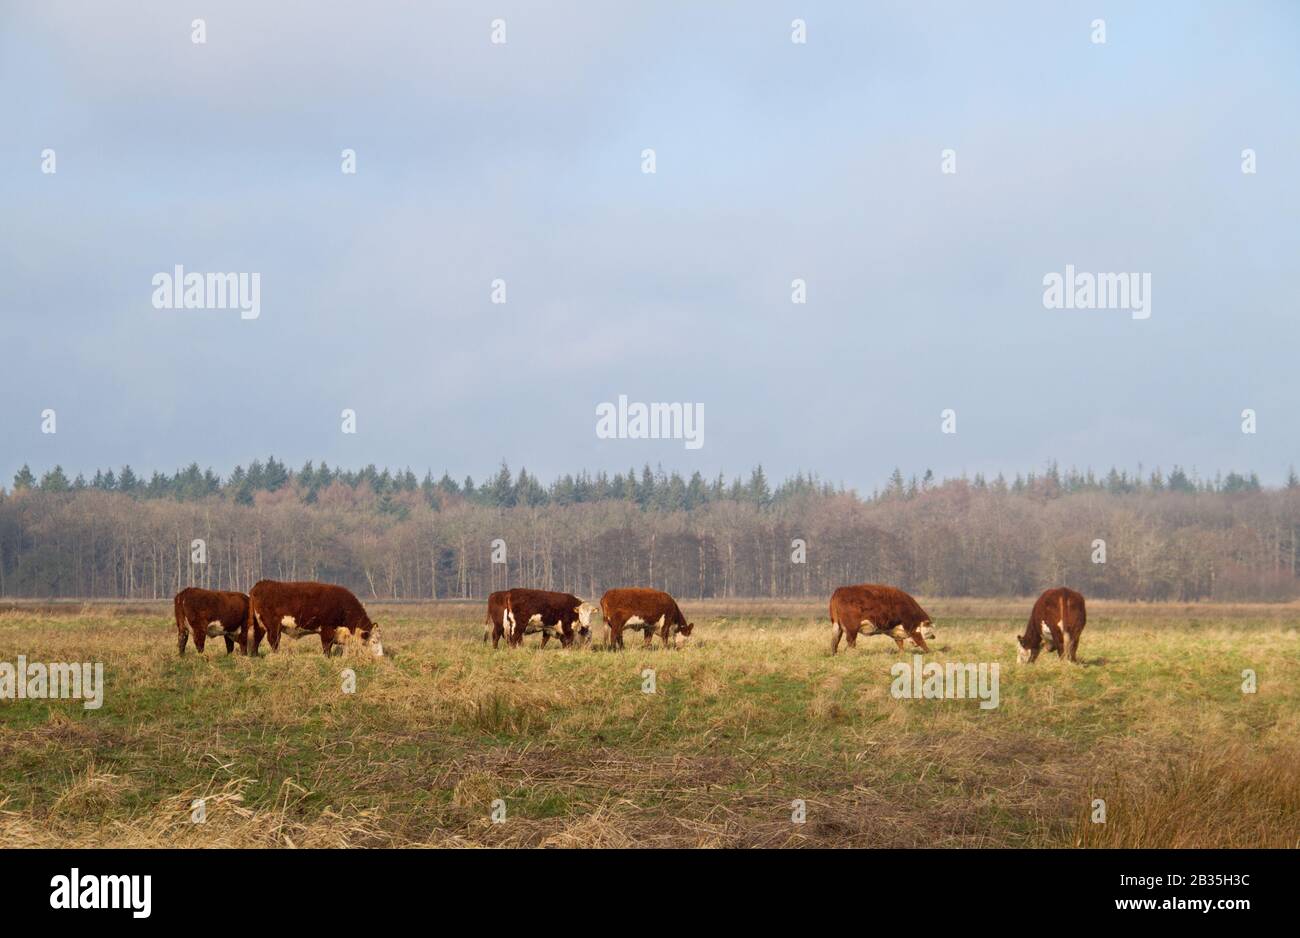 Hereford-cattle grazing in a Dutch nature reserve Stock Photo